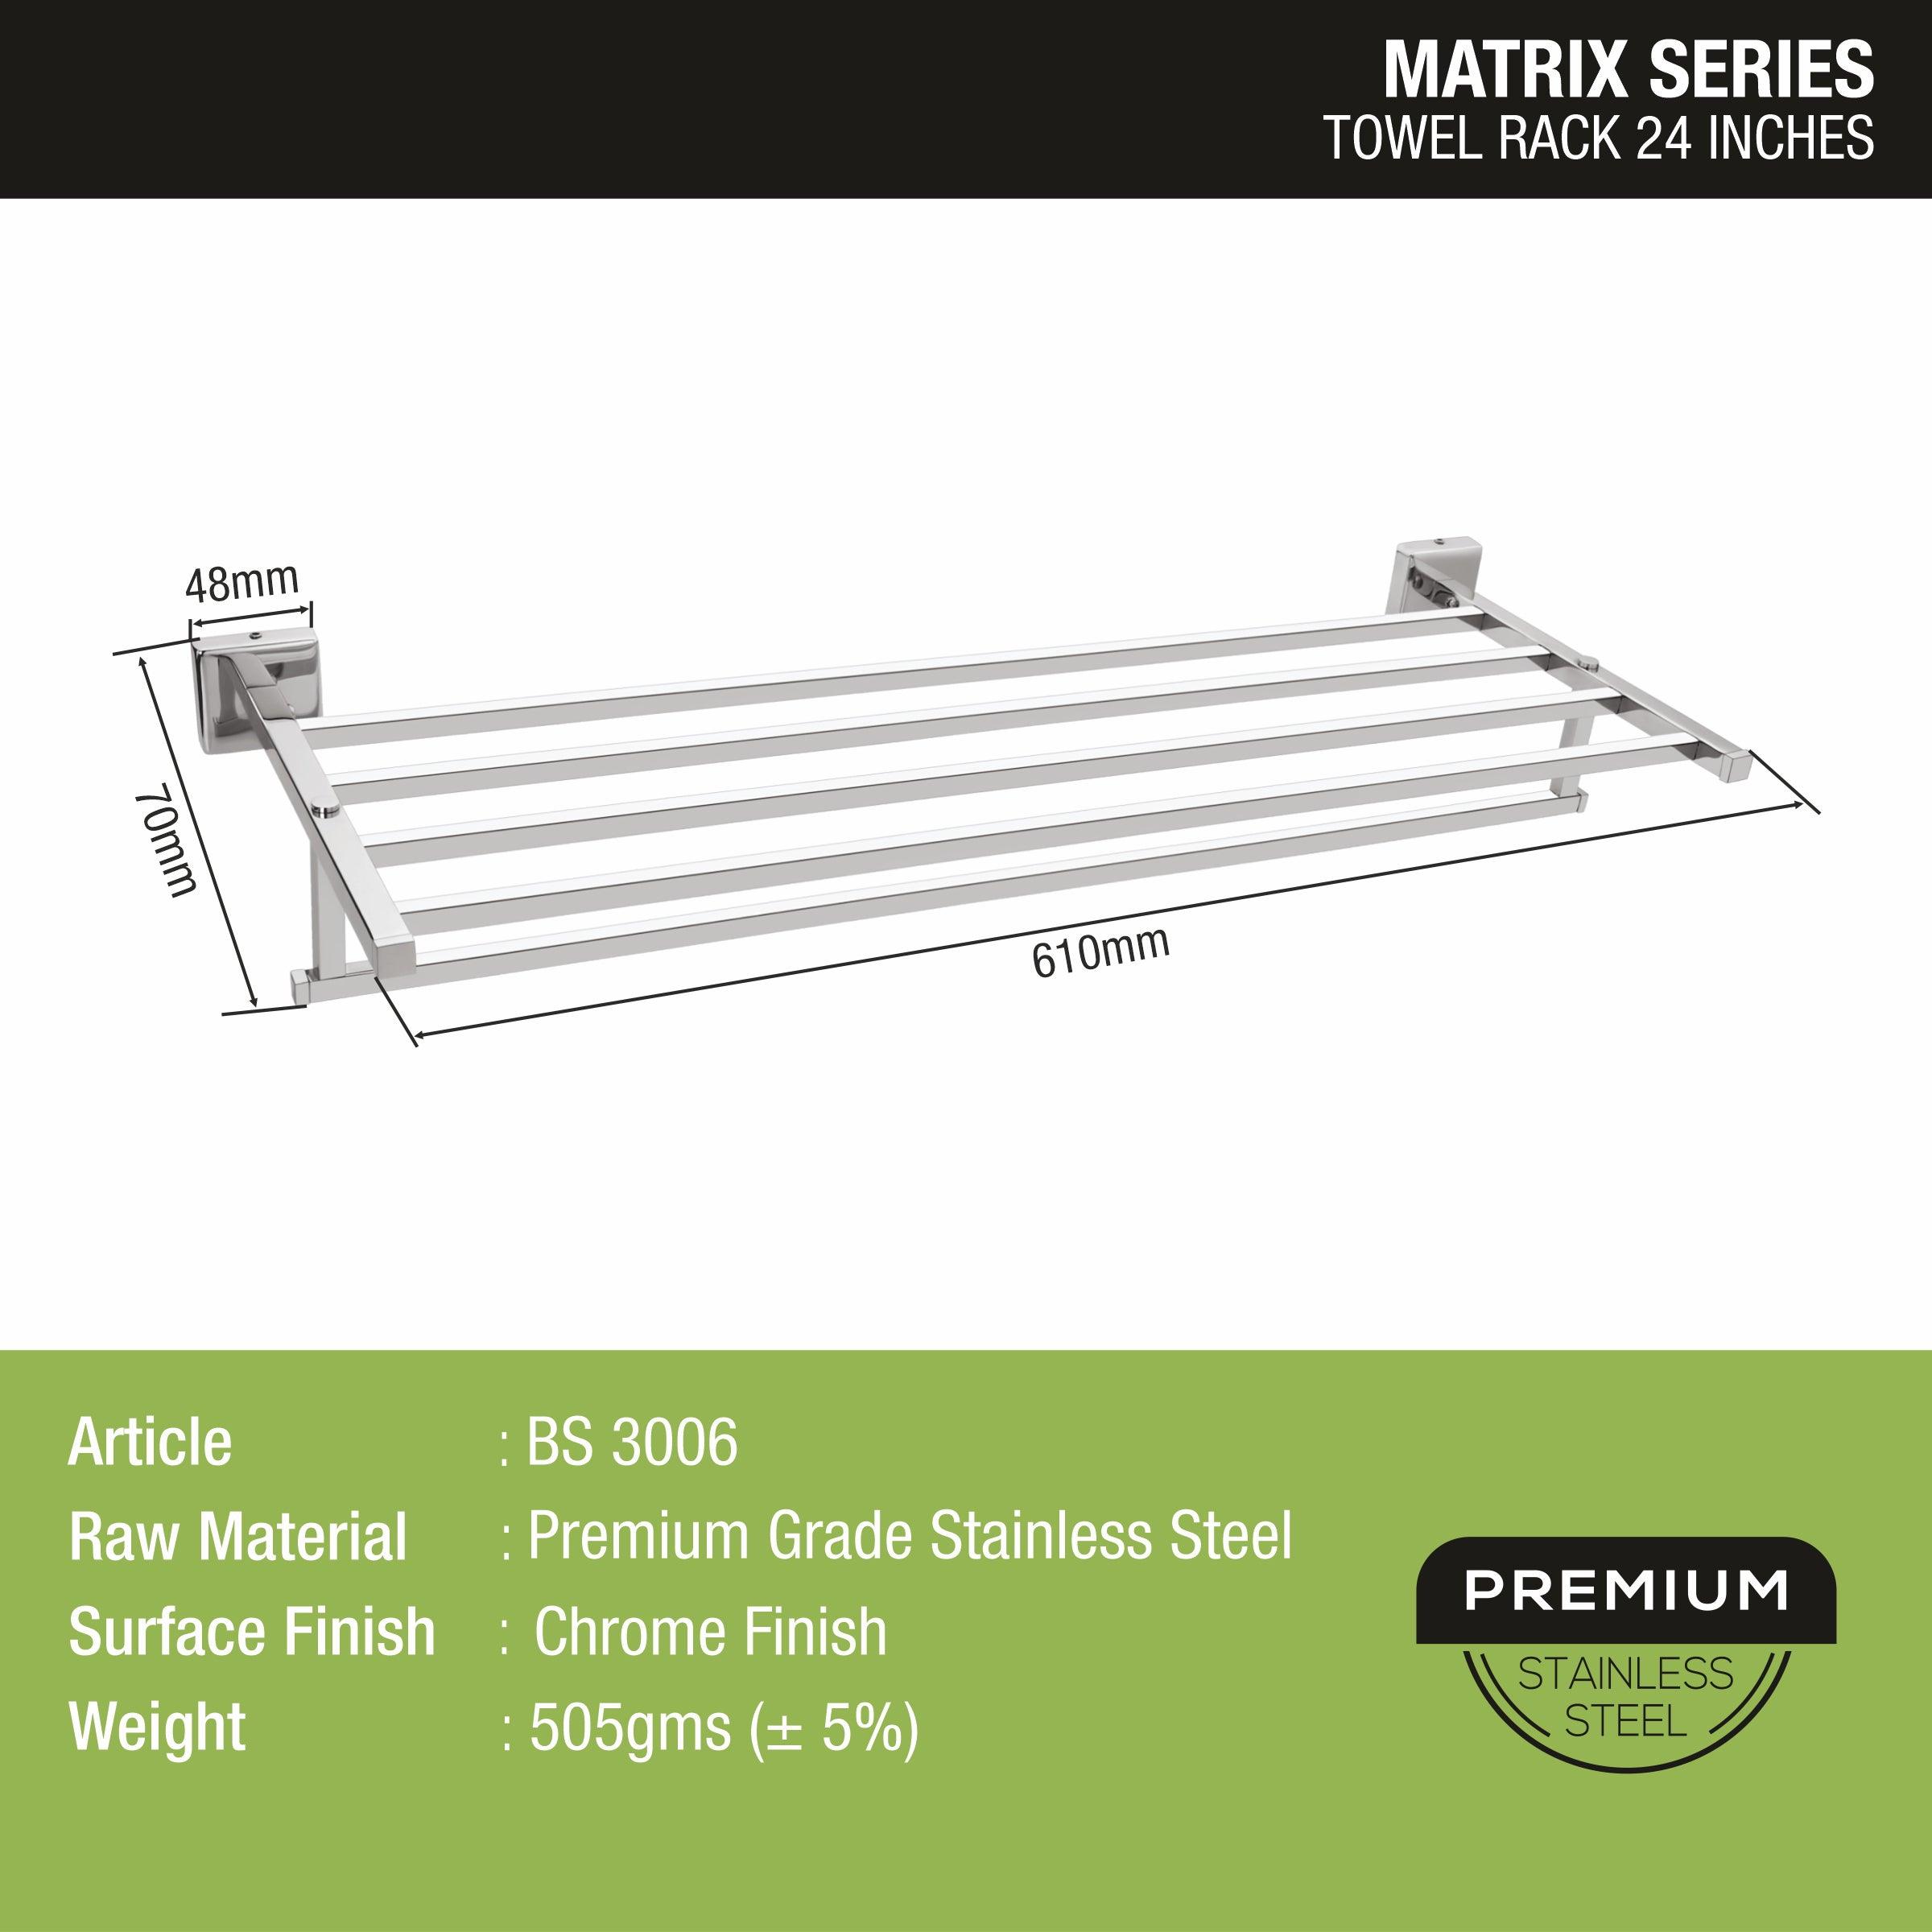 Matrix Towel Rack (24 Inches) size and dimension